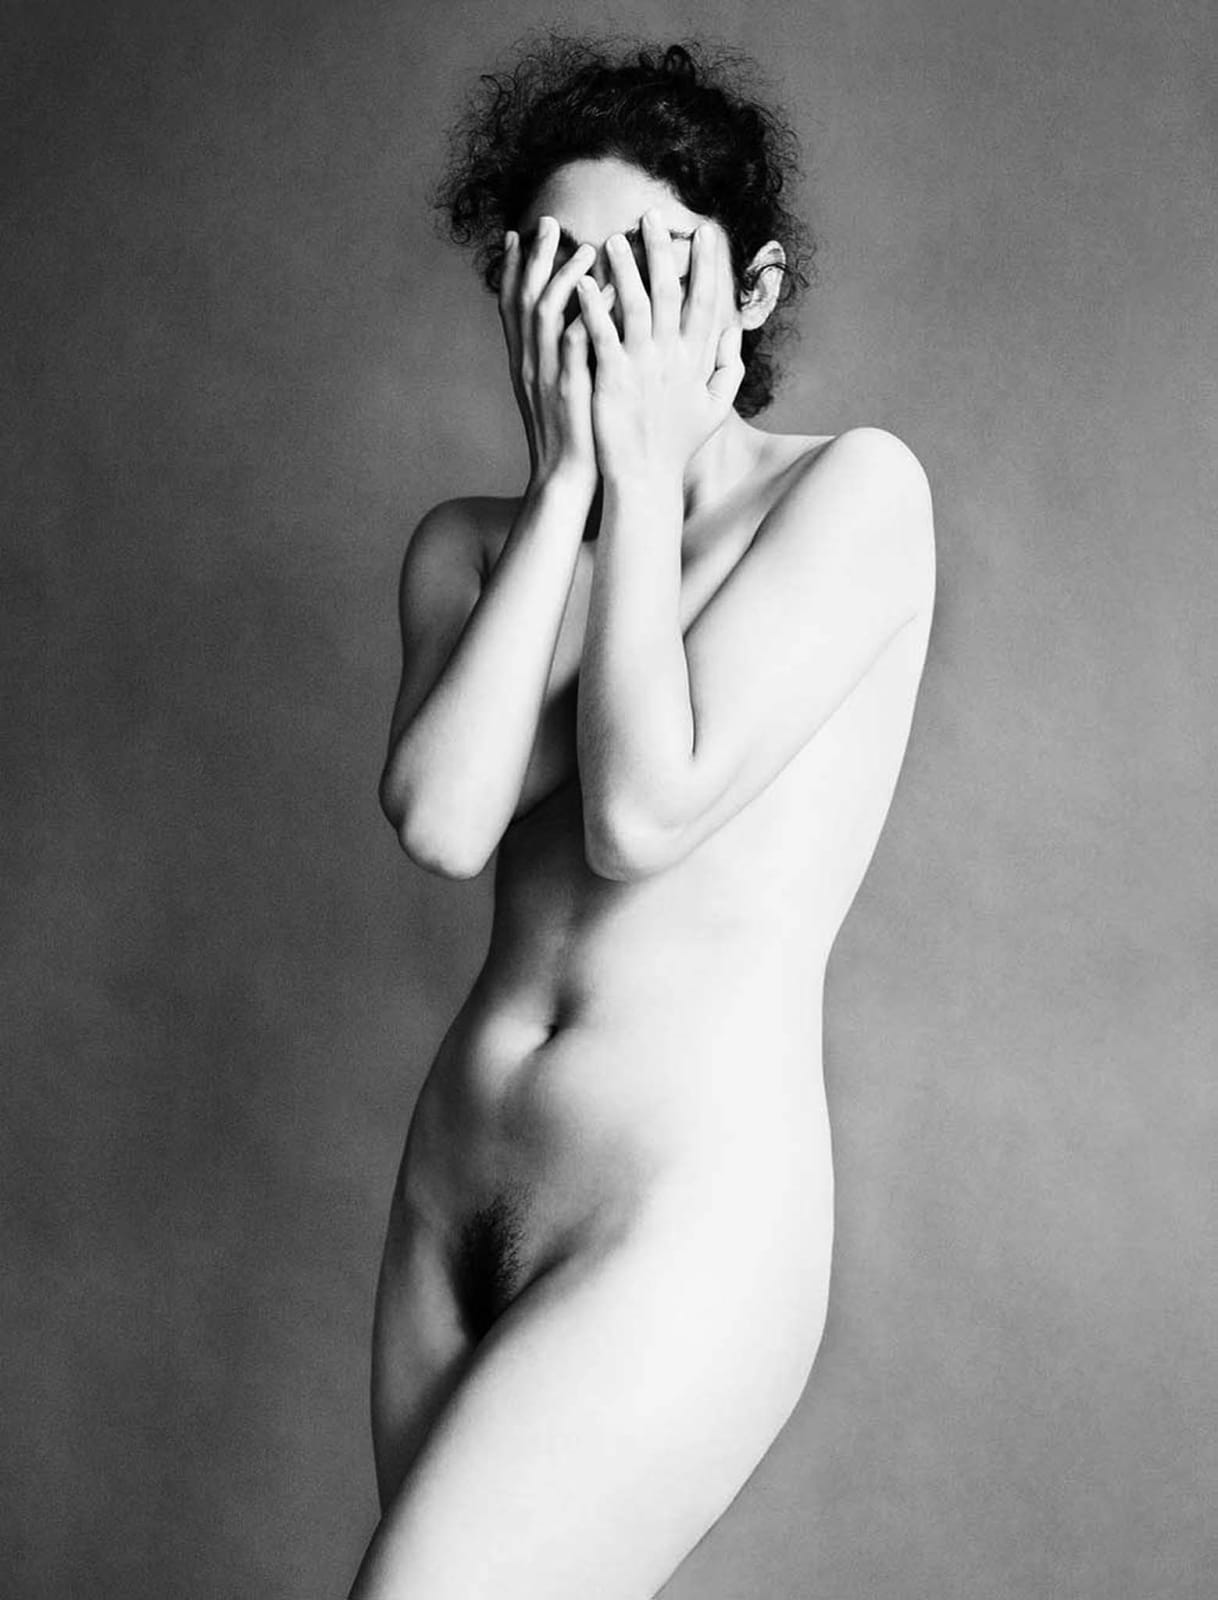 Works - Paolo Roversi, Photographs Shoot Gallery